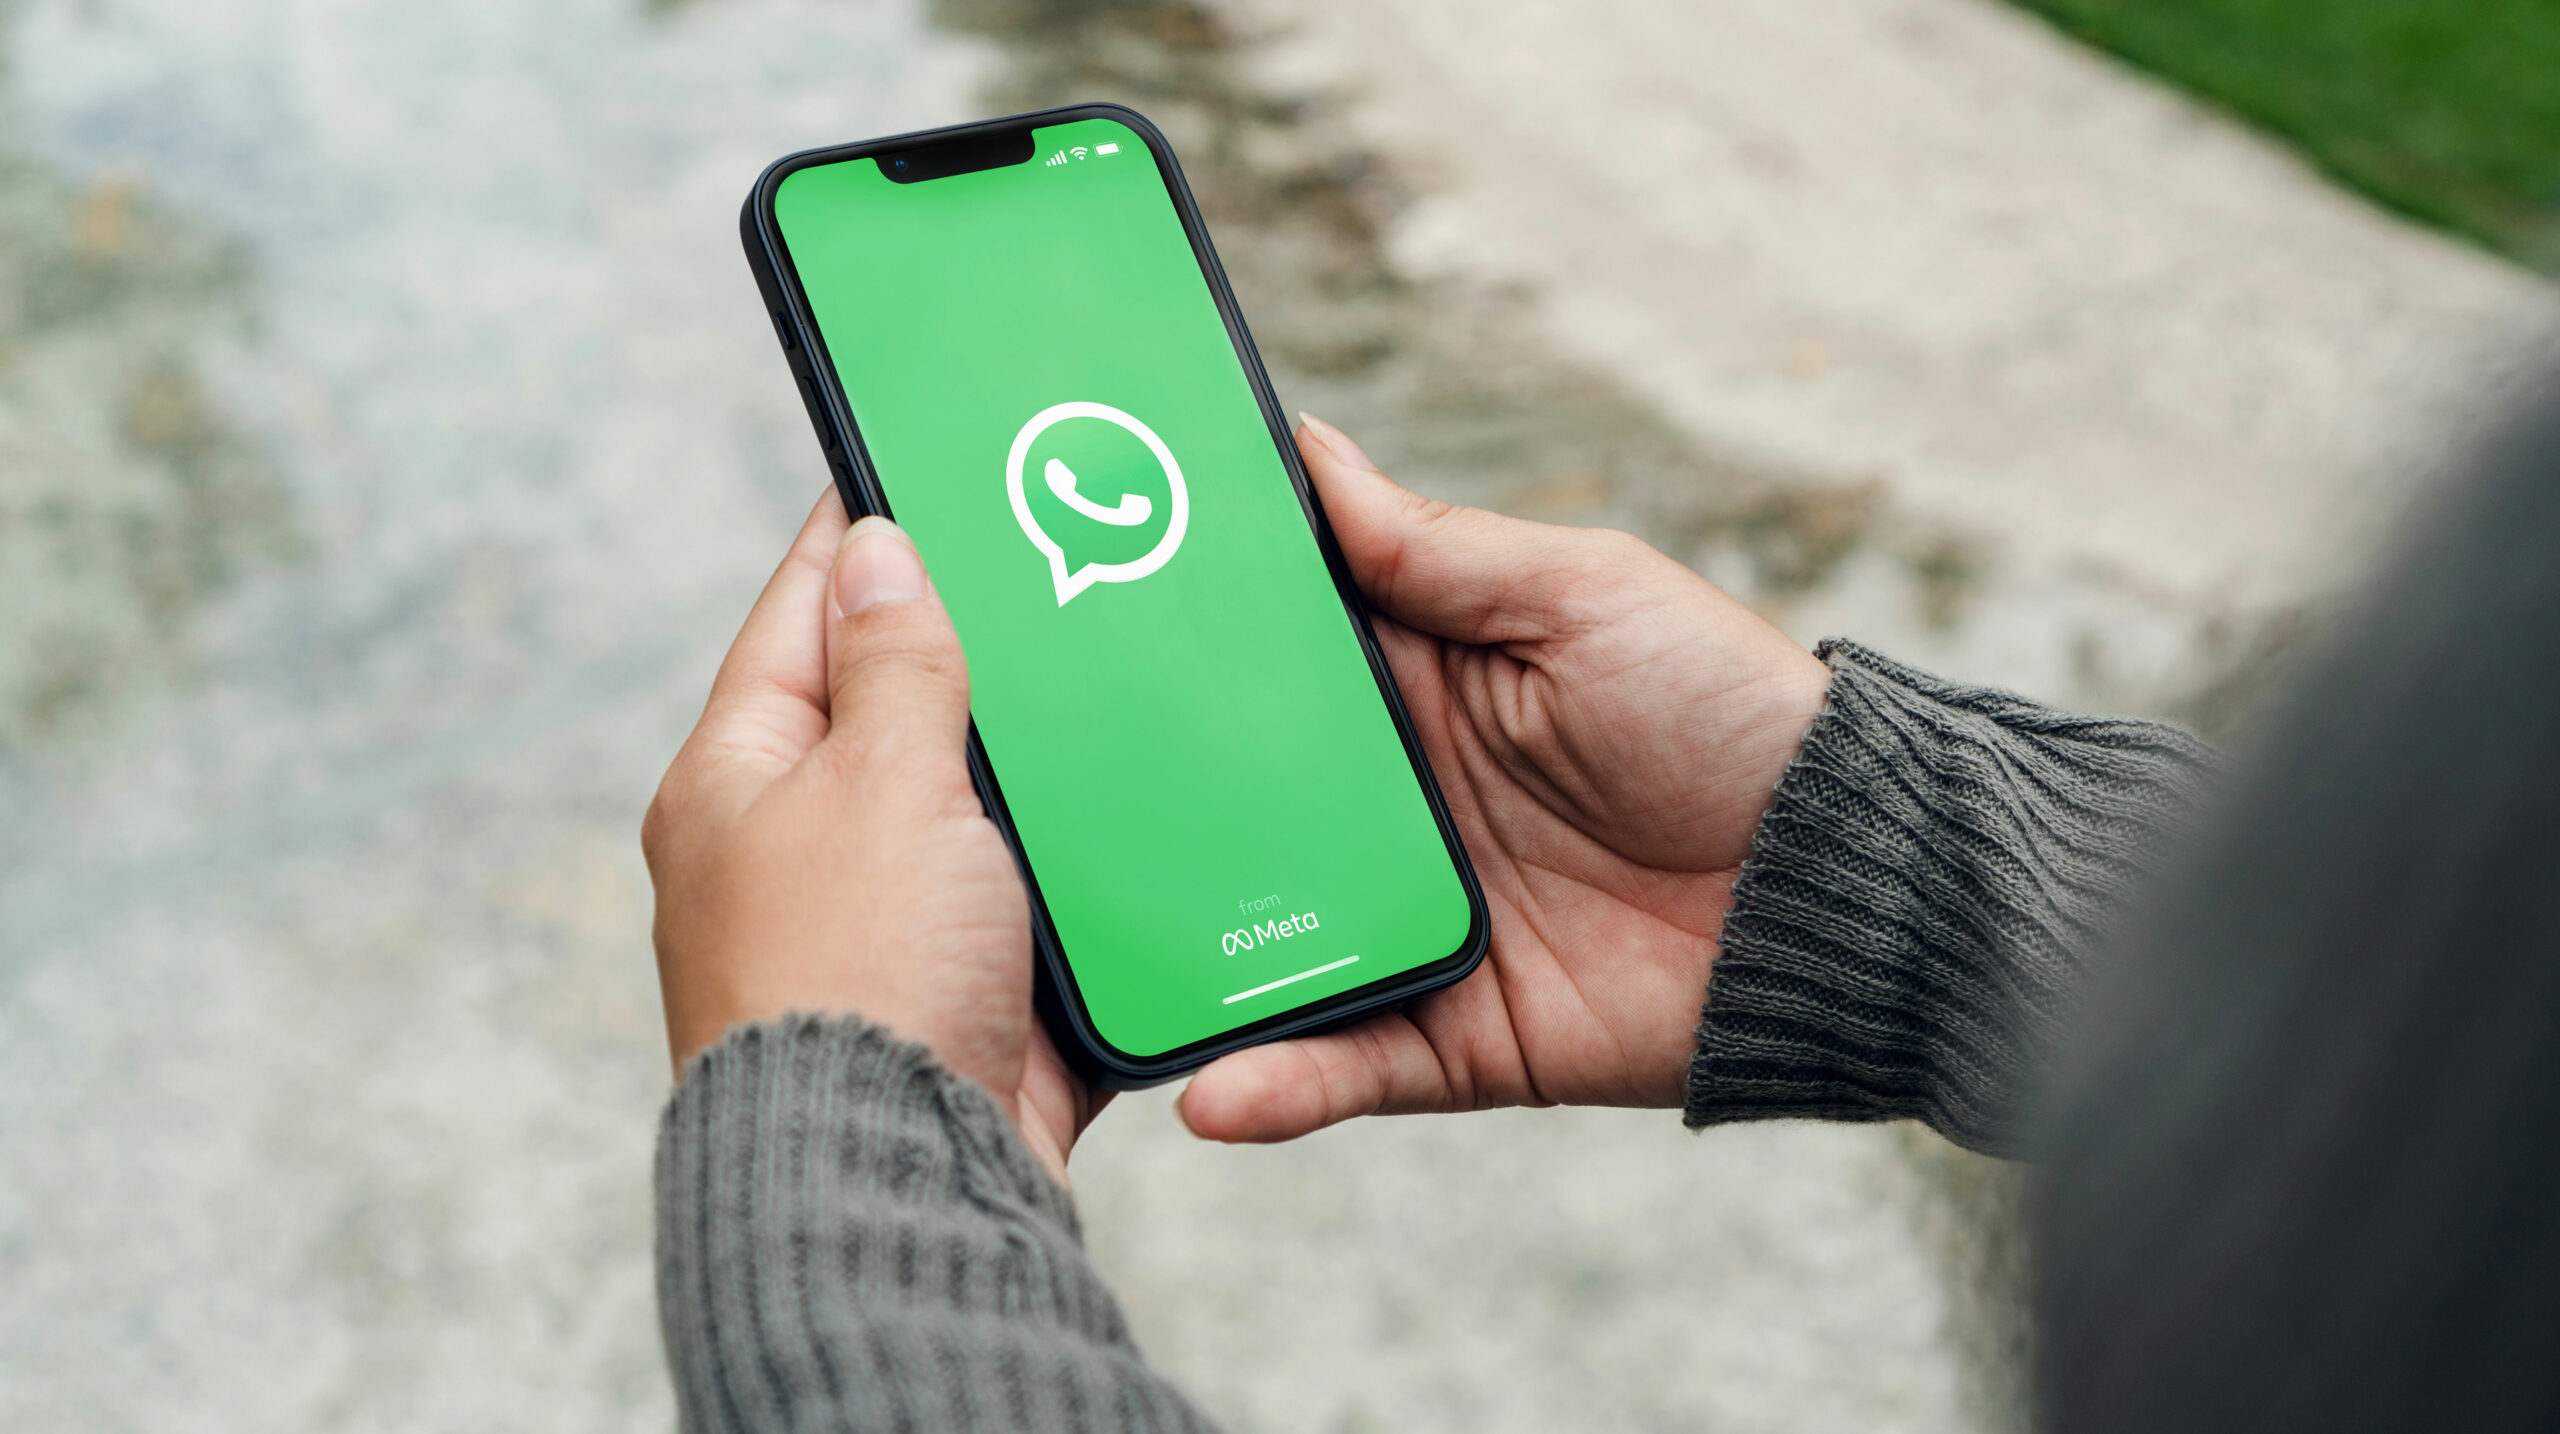 WhatsApp Users’ Device Information Can Be Easily Discovered